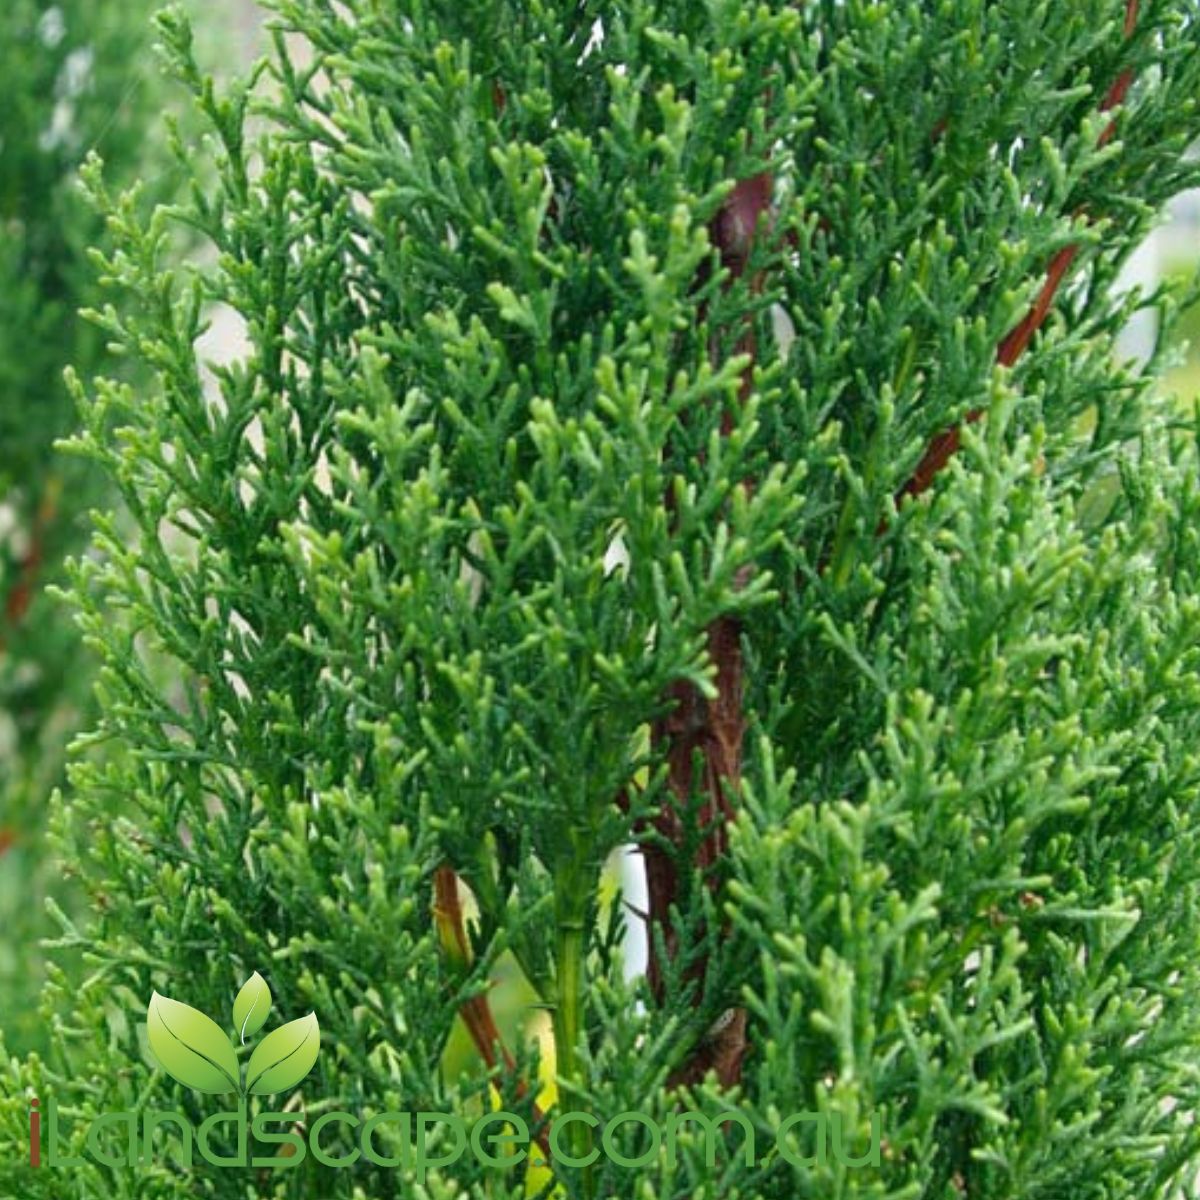 Cupressus Nitschkes Needles is commonly known as a pencil pine, fairly quick grower and stays more narrow and upright   great for screening and hedging and grows around 5-6m tall x 1.0m wide 